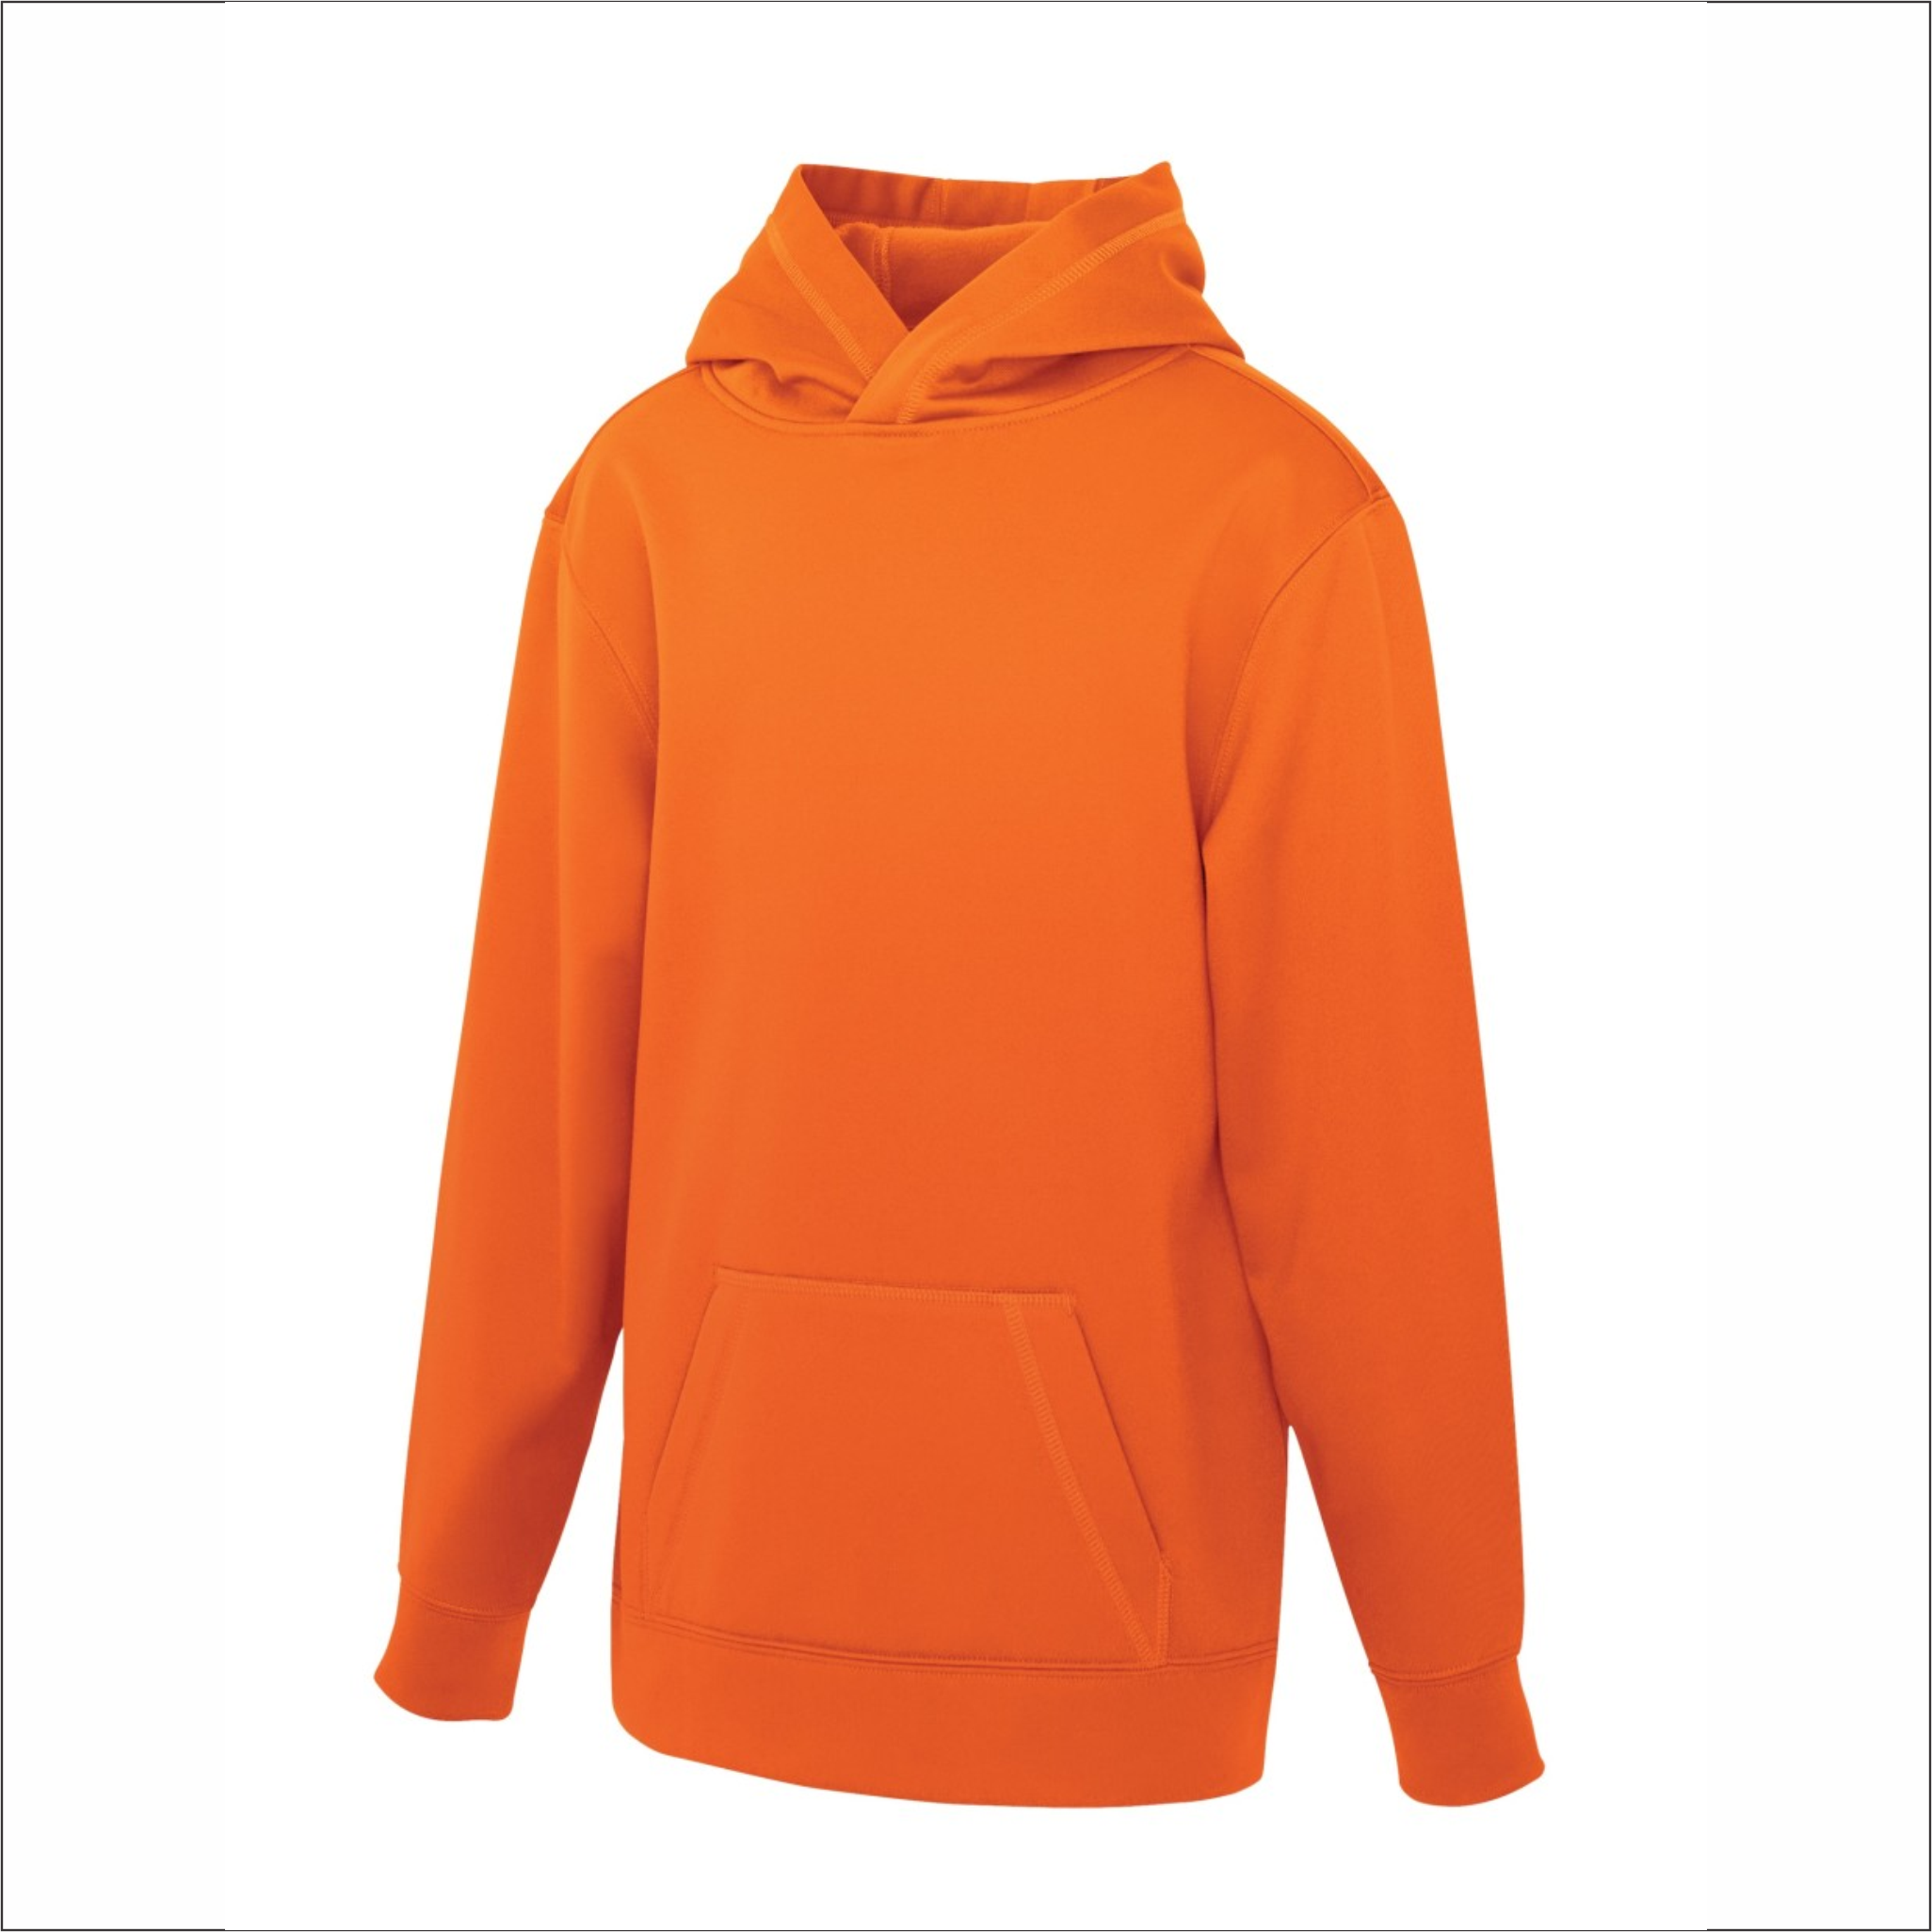 Youth Hoodie - Polyester - ATC Y2005